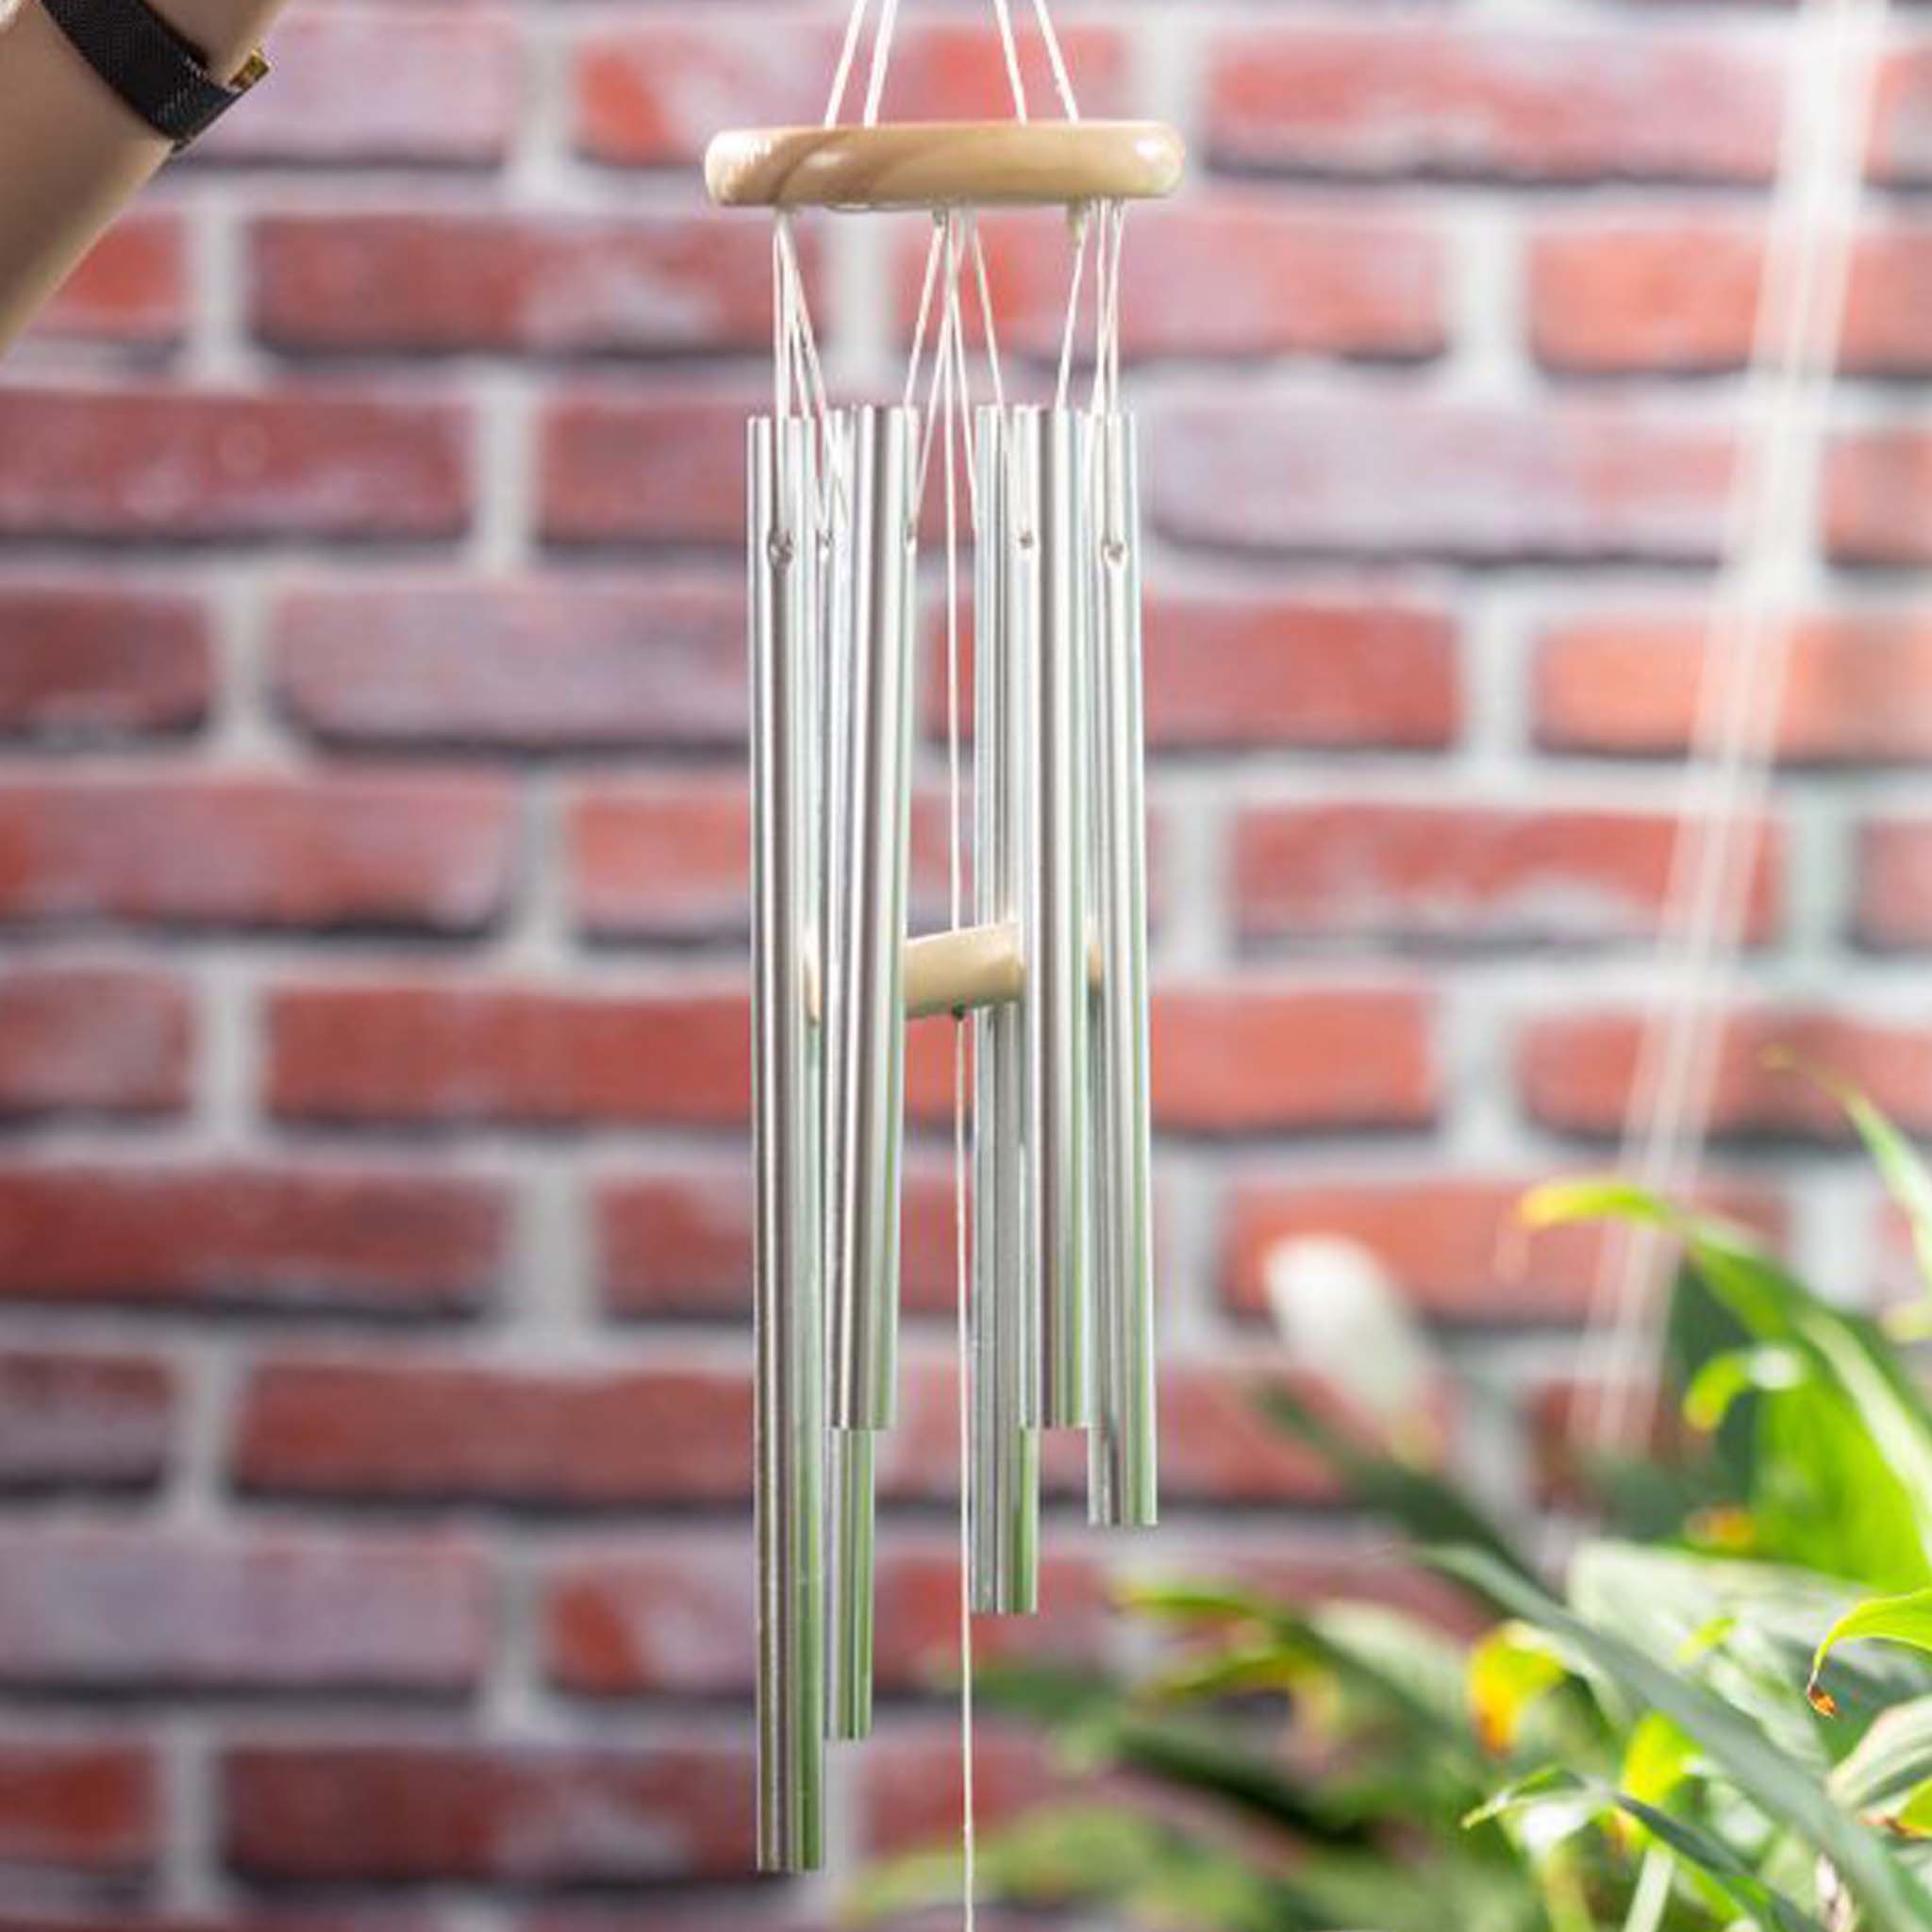 Remembrance Listen To The Wind Personalized Wind ChimeCustomly Gifts